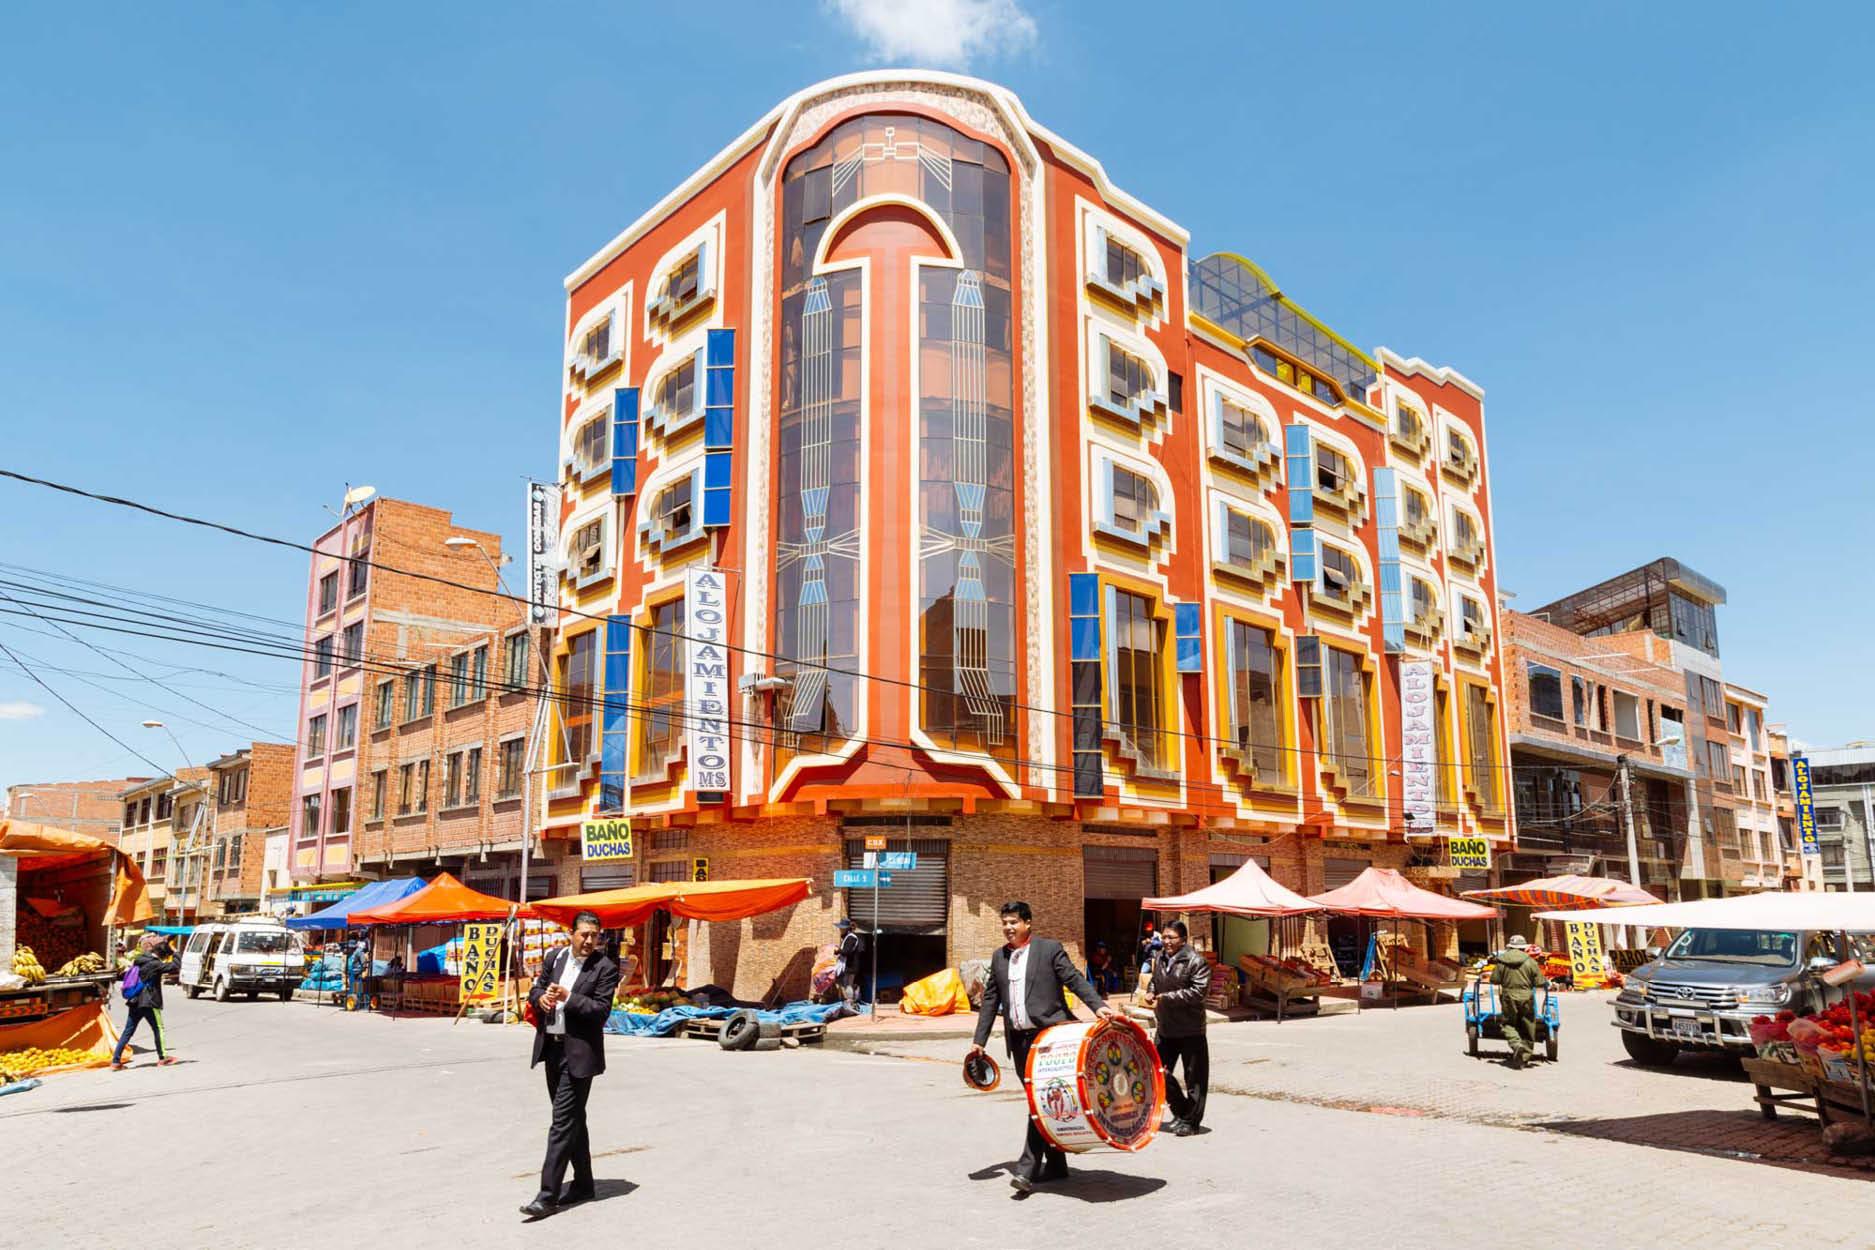 El Alto's Dazzling Palaces, Bowler Hats and Flying Subway are a Feast for the Senses